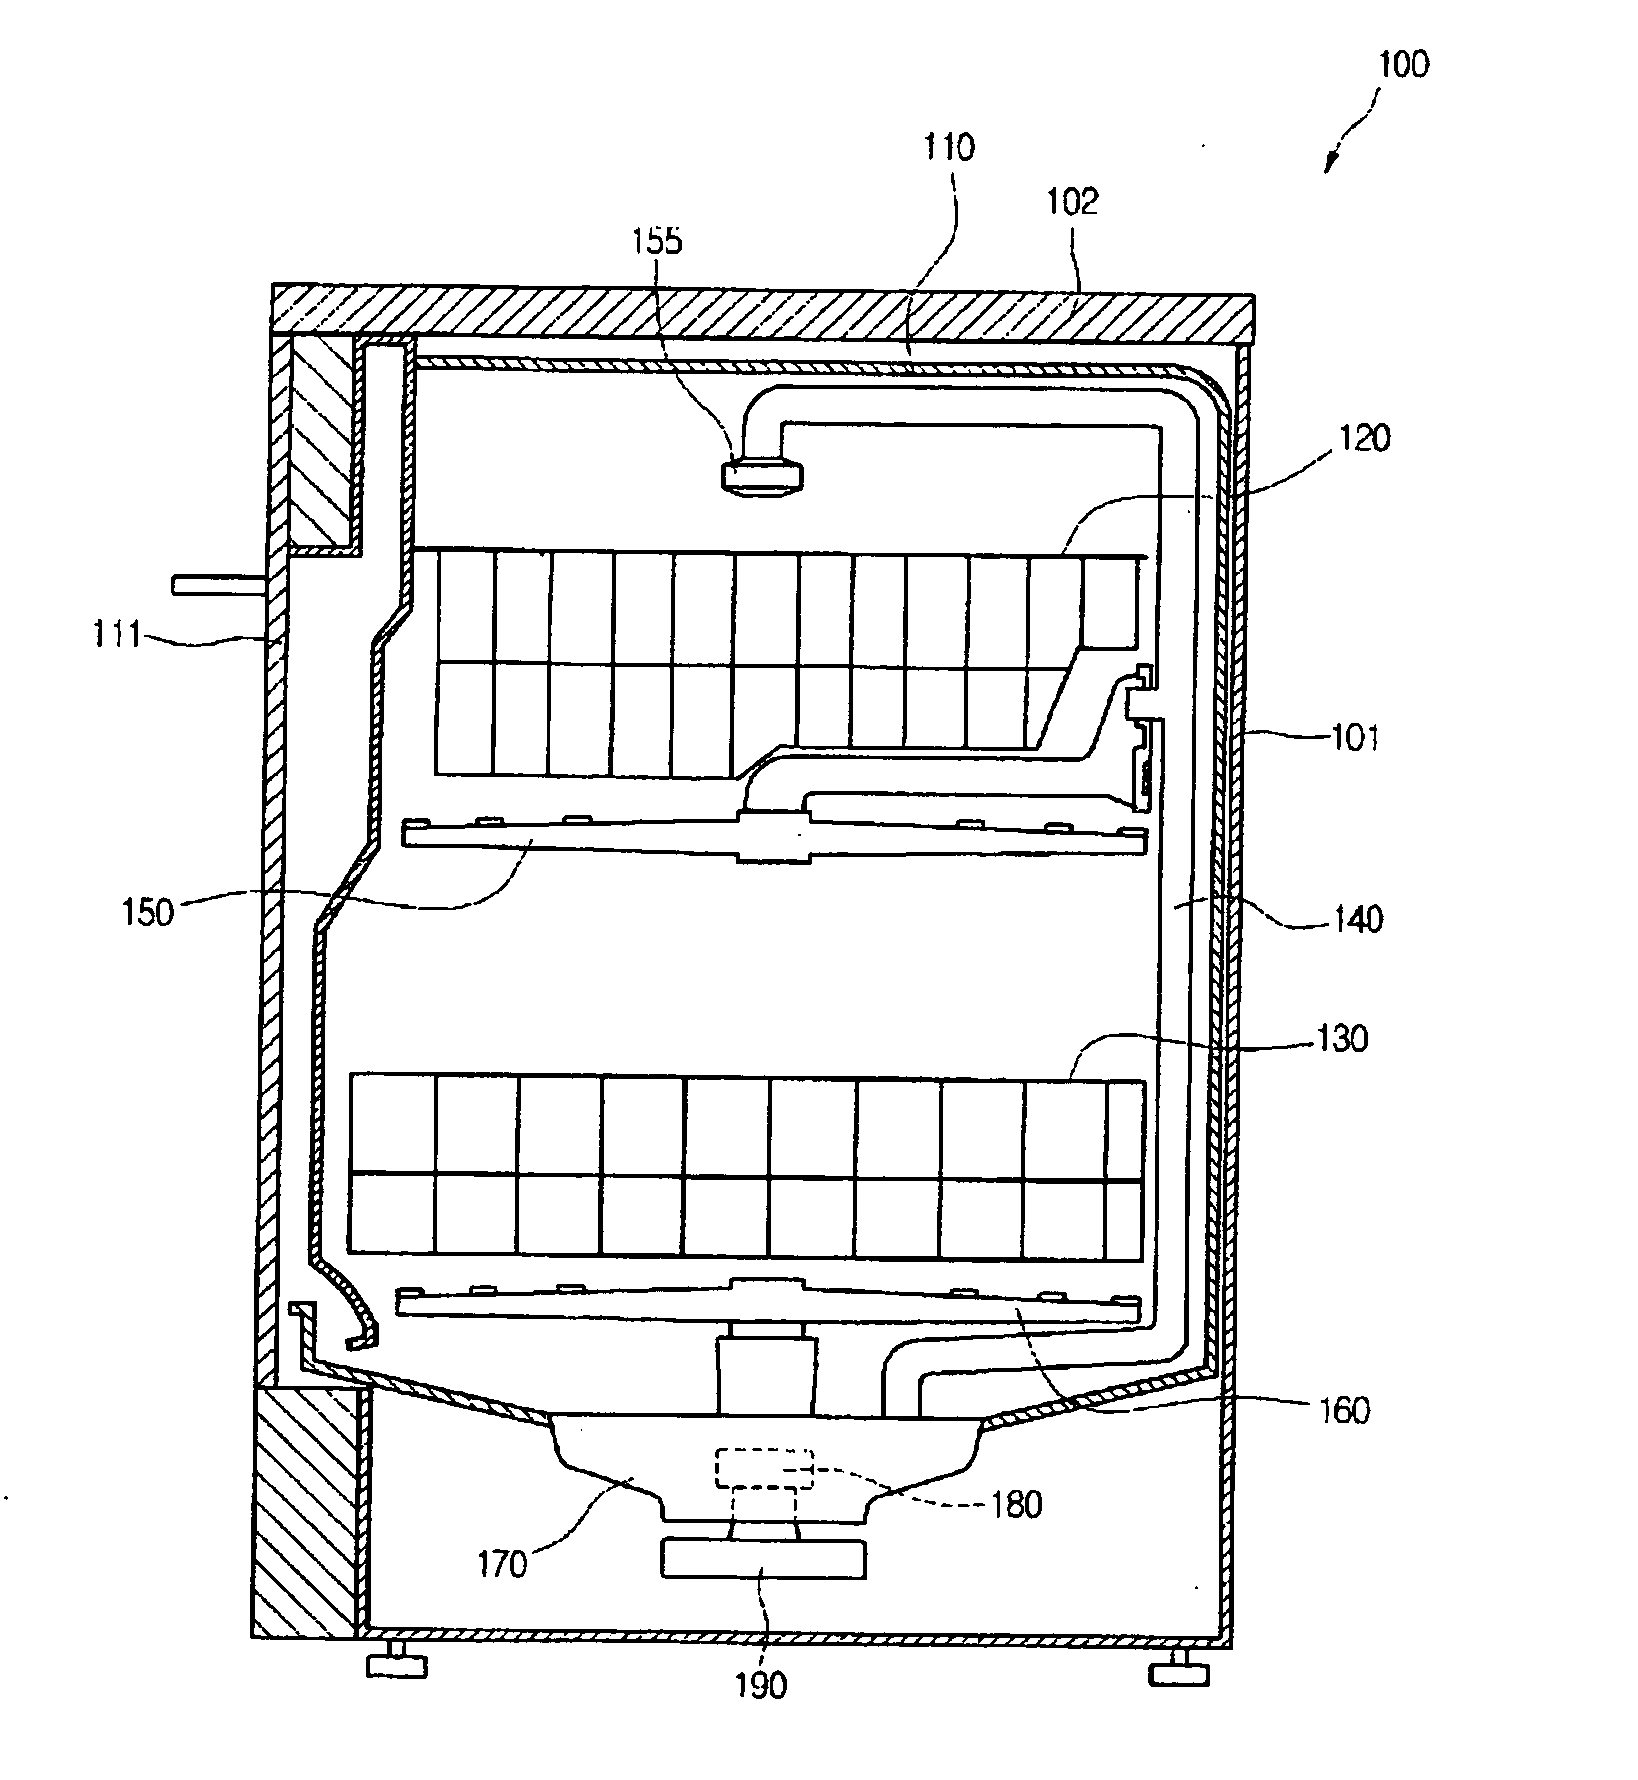 Sump of Dish Washer